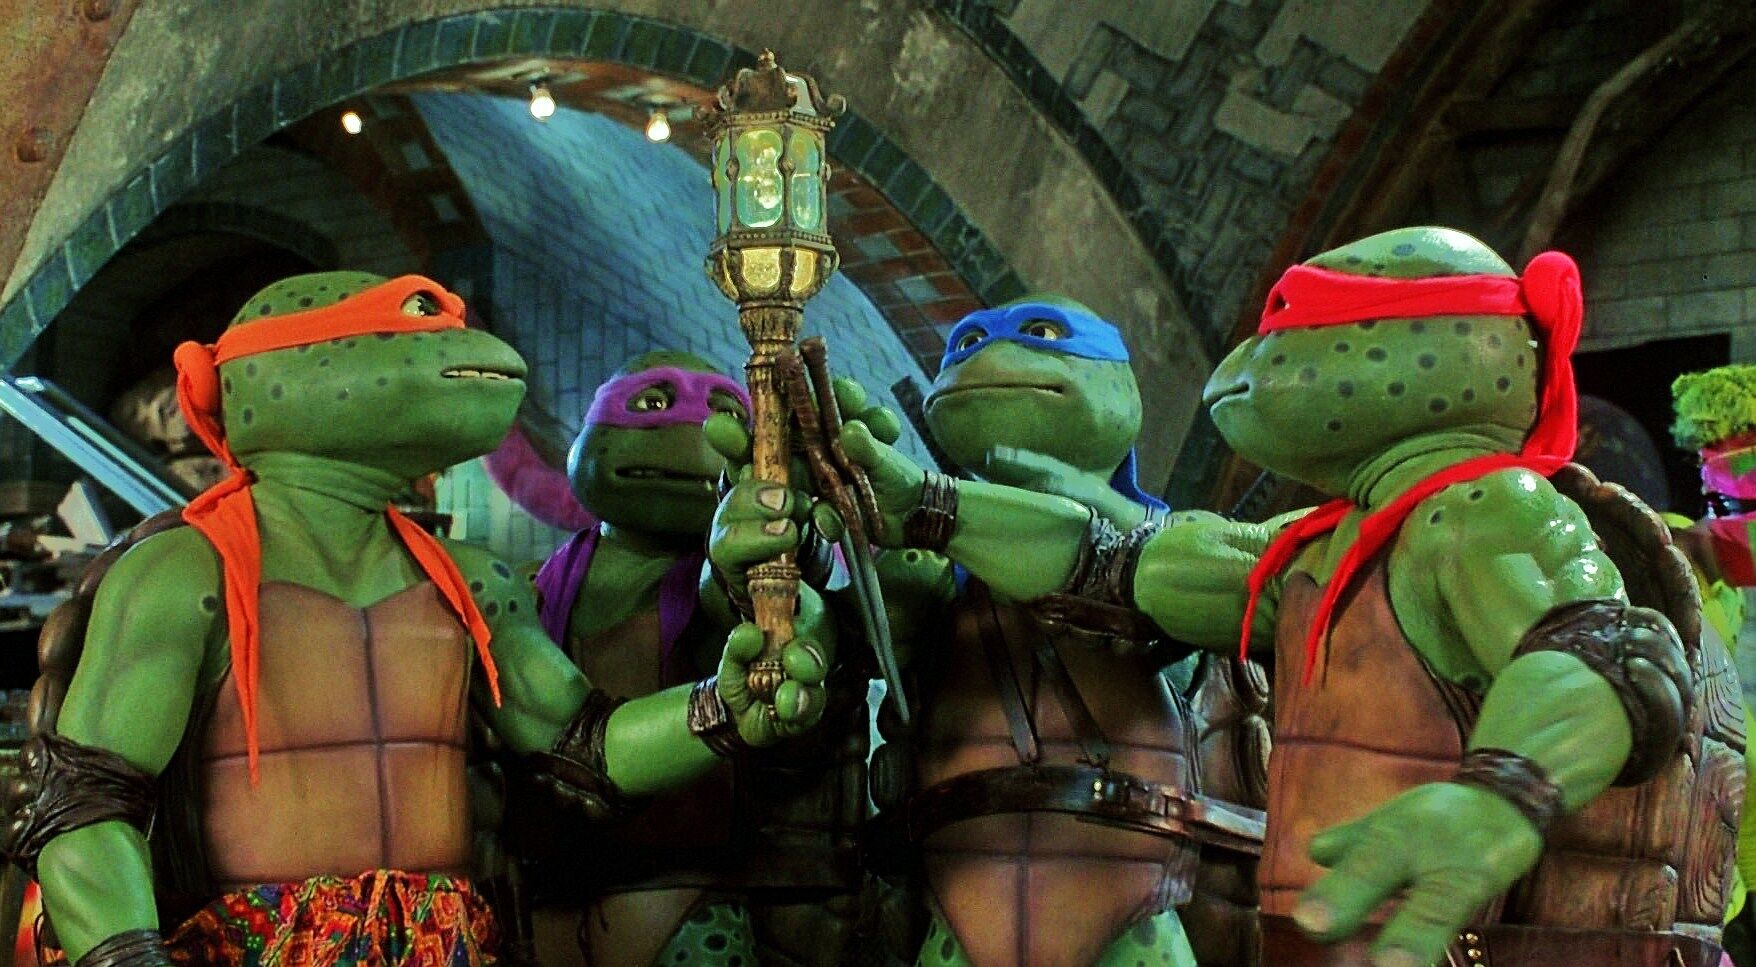 https://static.wikia.nocookie.net/tmnt/images/9/9b/Tmnt03.jpg/revision/latest/scale-to-width-down/1756?cb=20100324233116